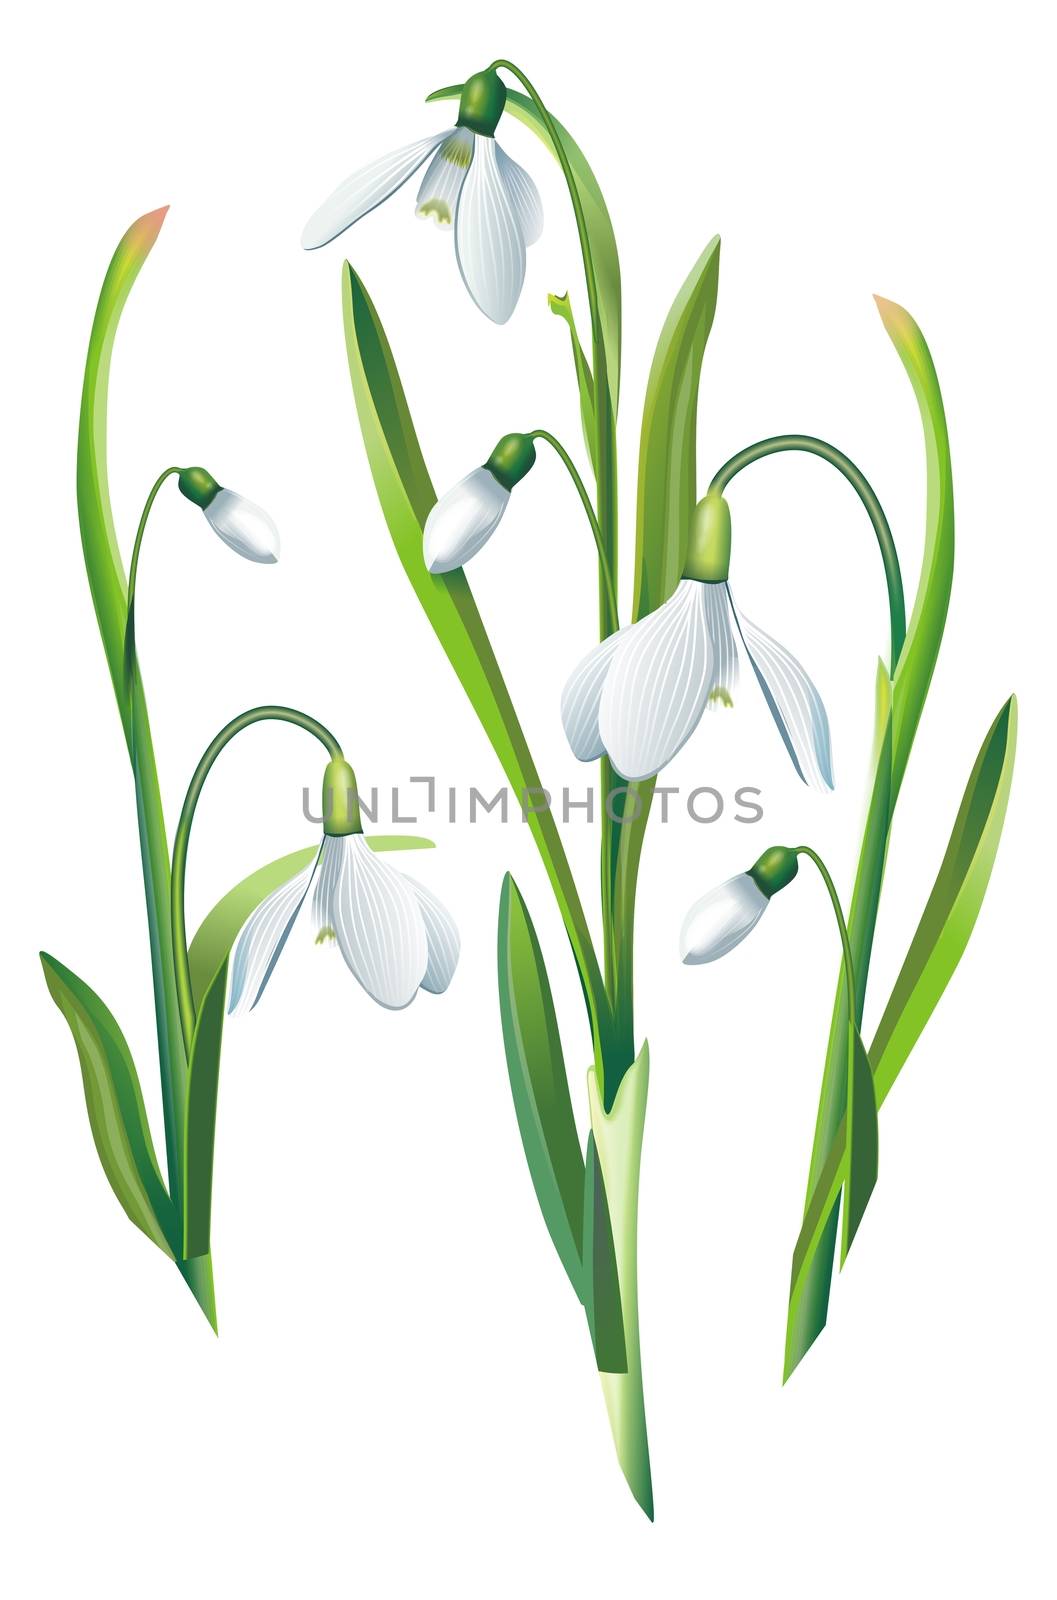 Blossom Snowdrop Flowers Illustration Isolated on White